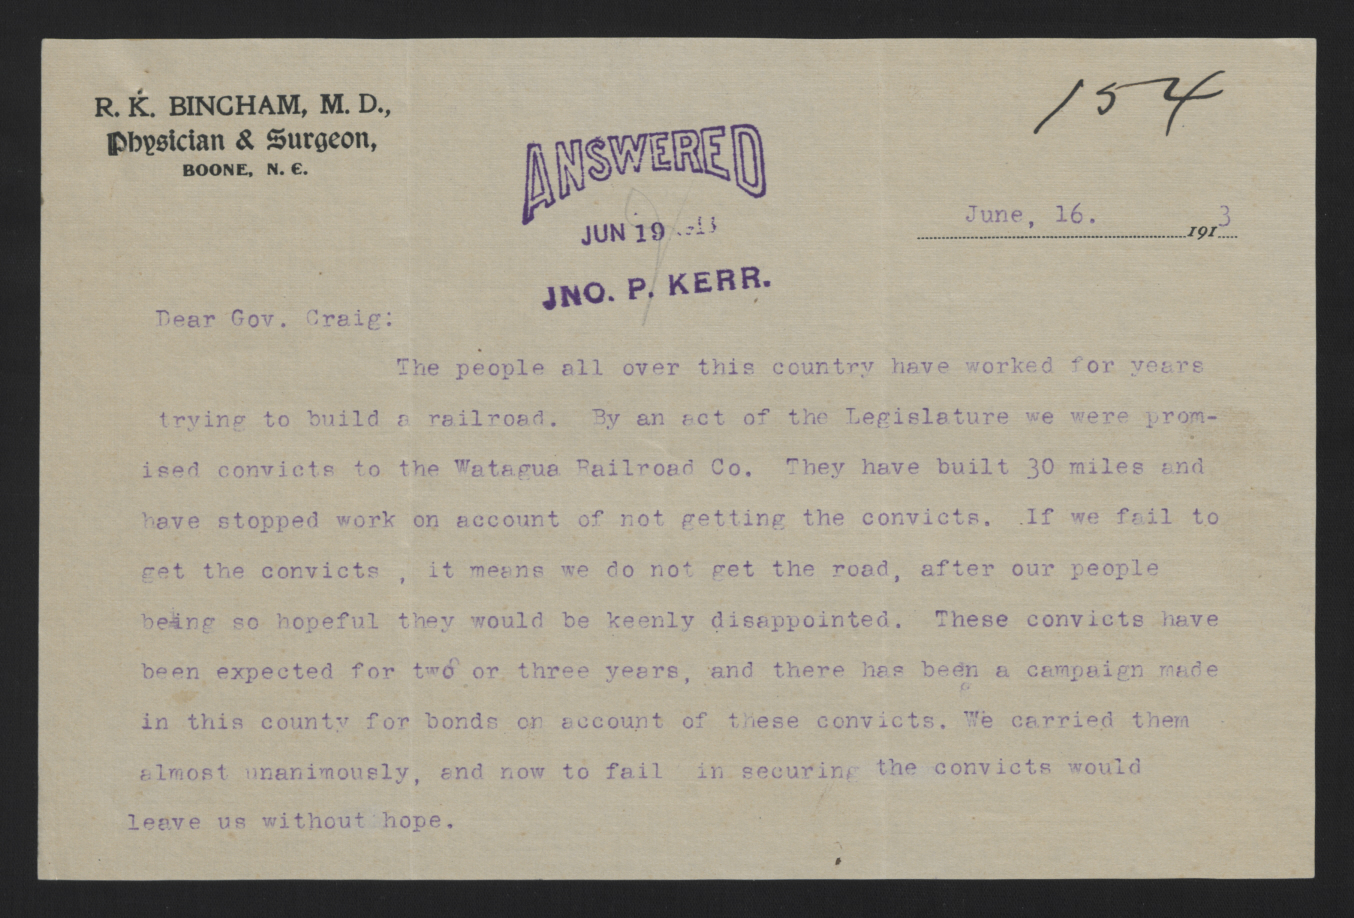 Letter from Bingham to Craig, June 16, 1913, page 1